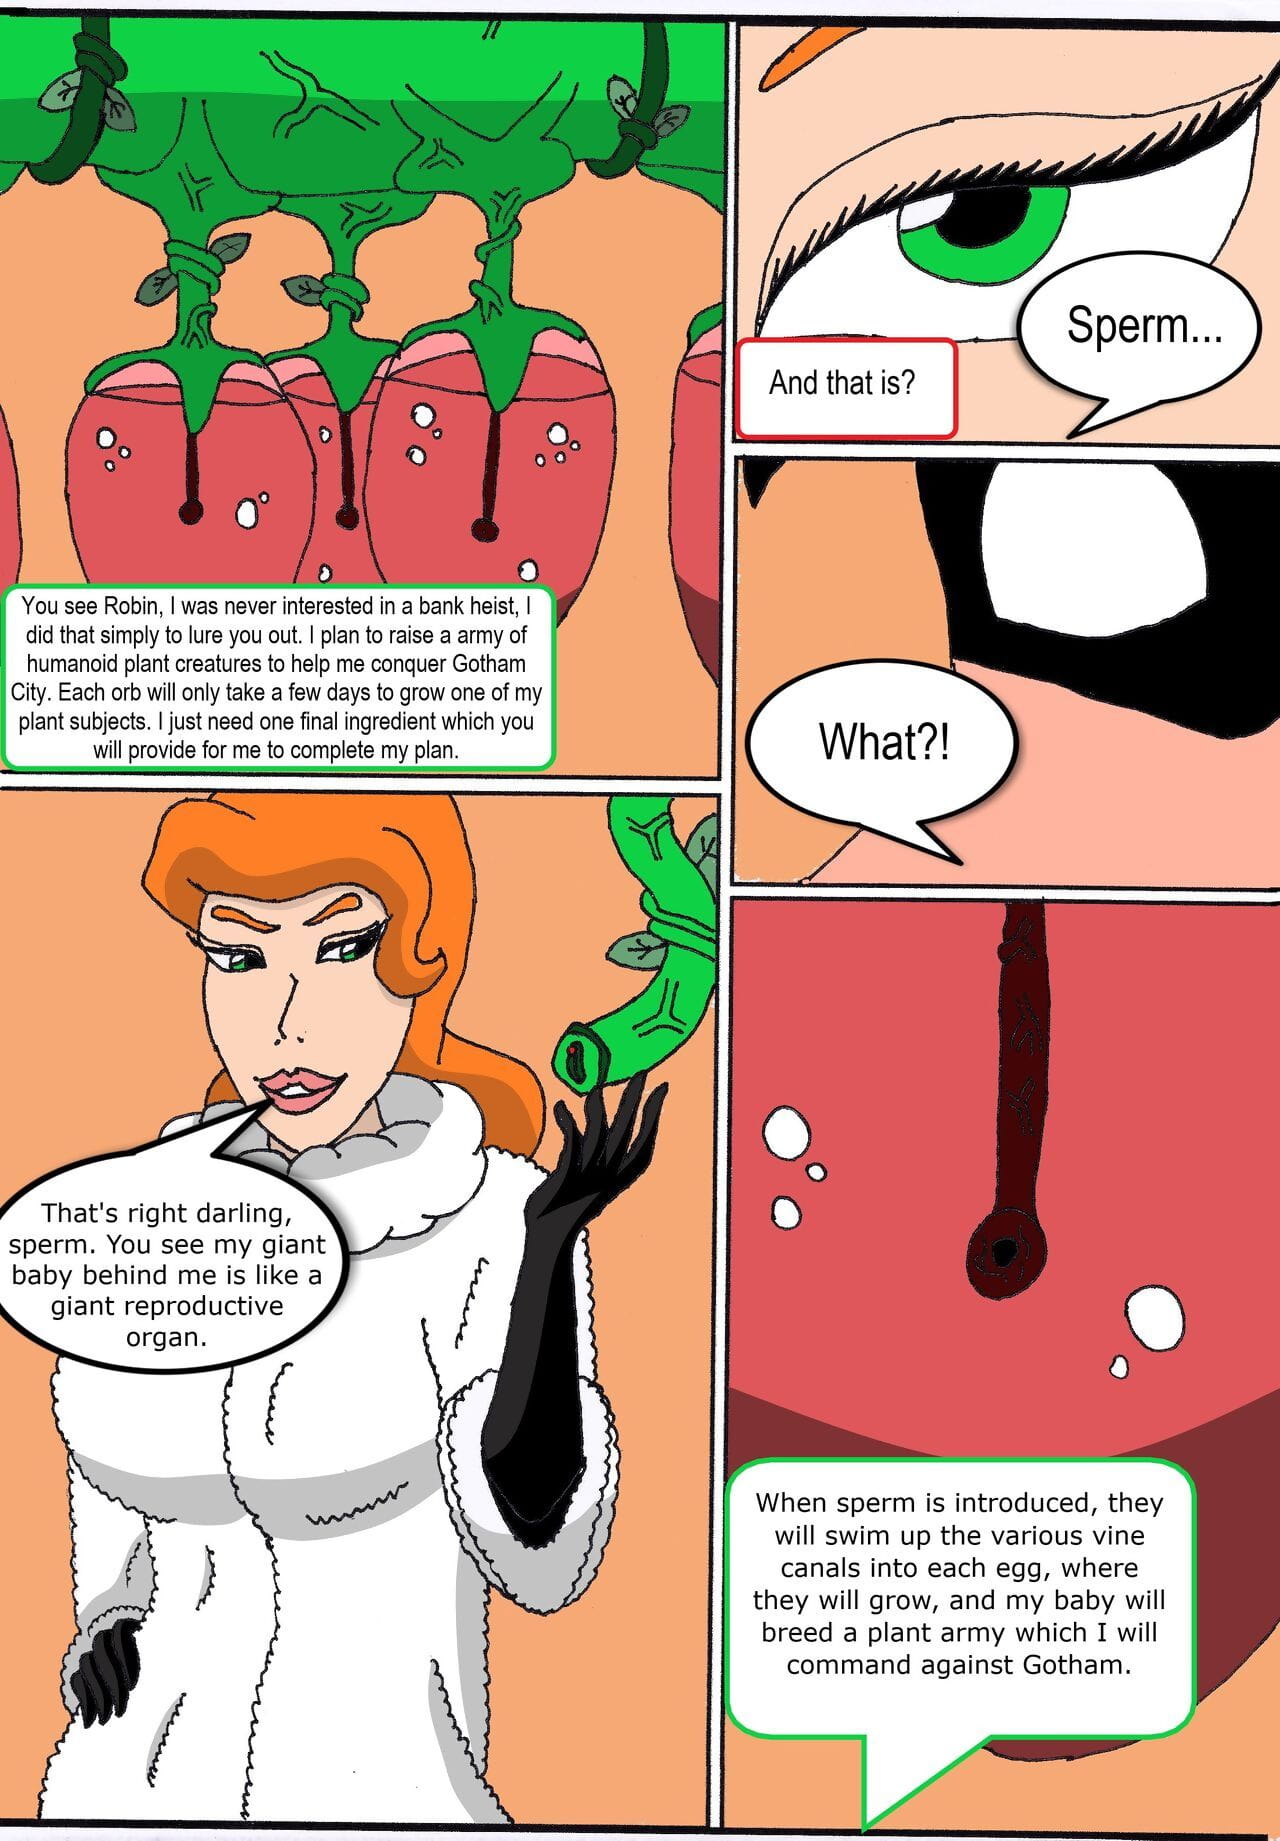 Elicitation of his Intimate Seed- Poison Ivy and Robin page 1